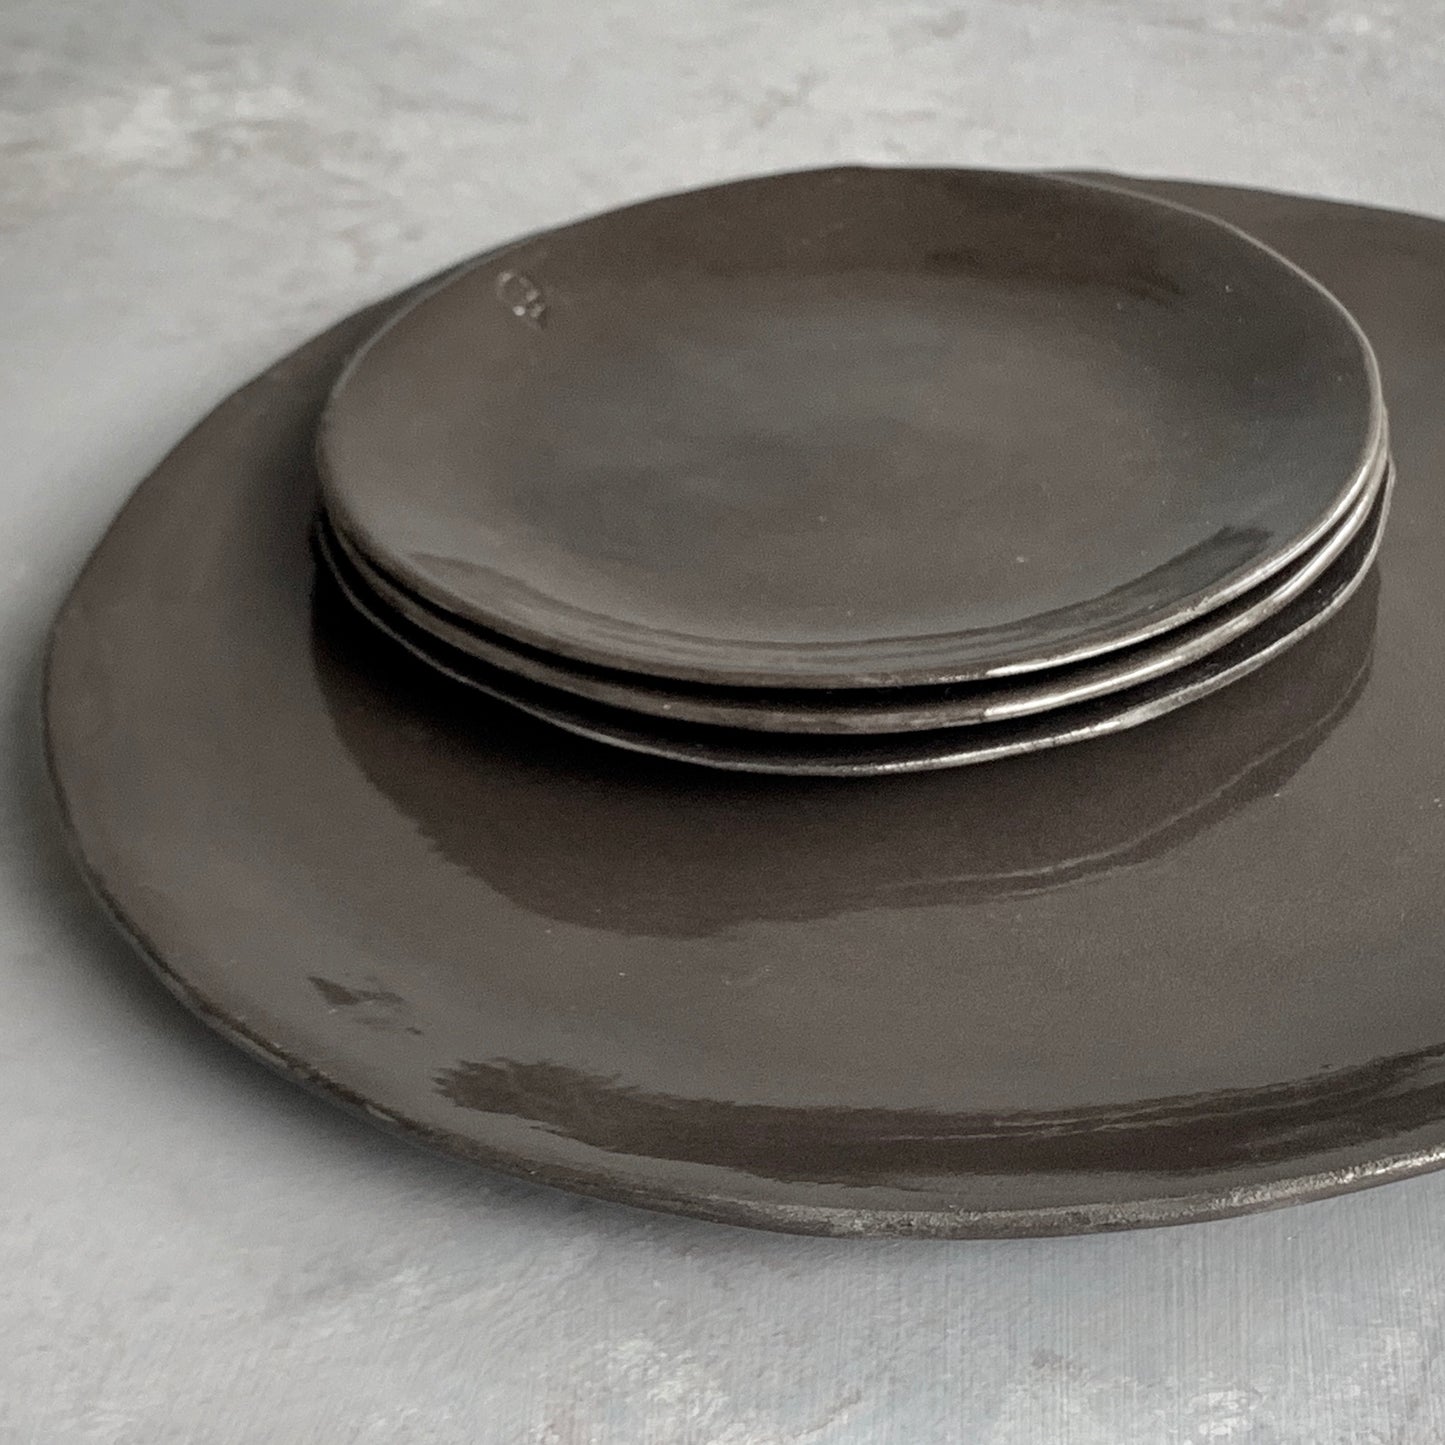 Serving plate XL Roots Black